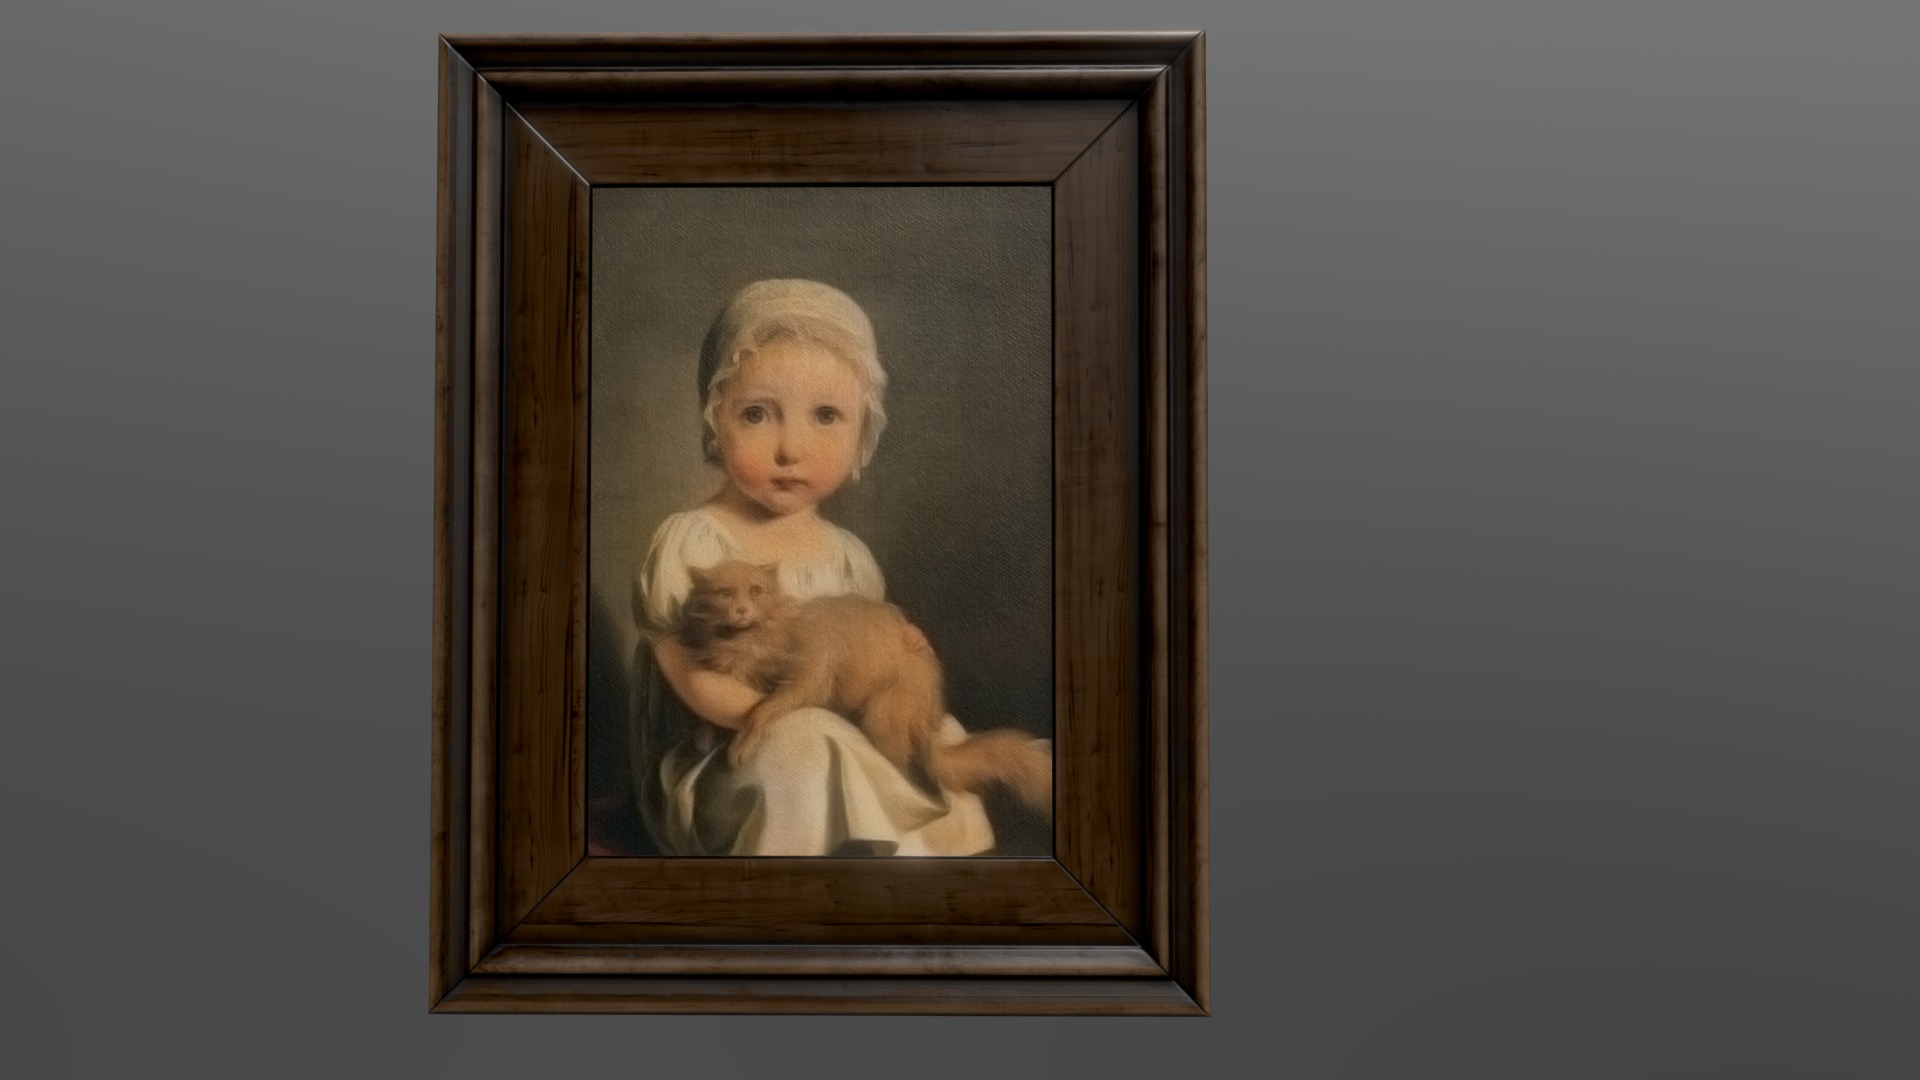 3D model Game Art: 3 X Paintings - This is a 3D model of the Game Art: 3 X Paintings. The 3D model is about a framed picture of a baby.